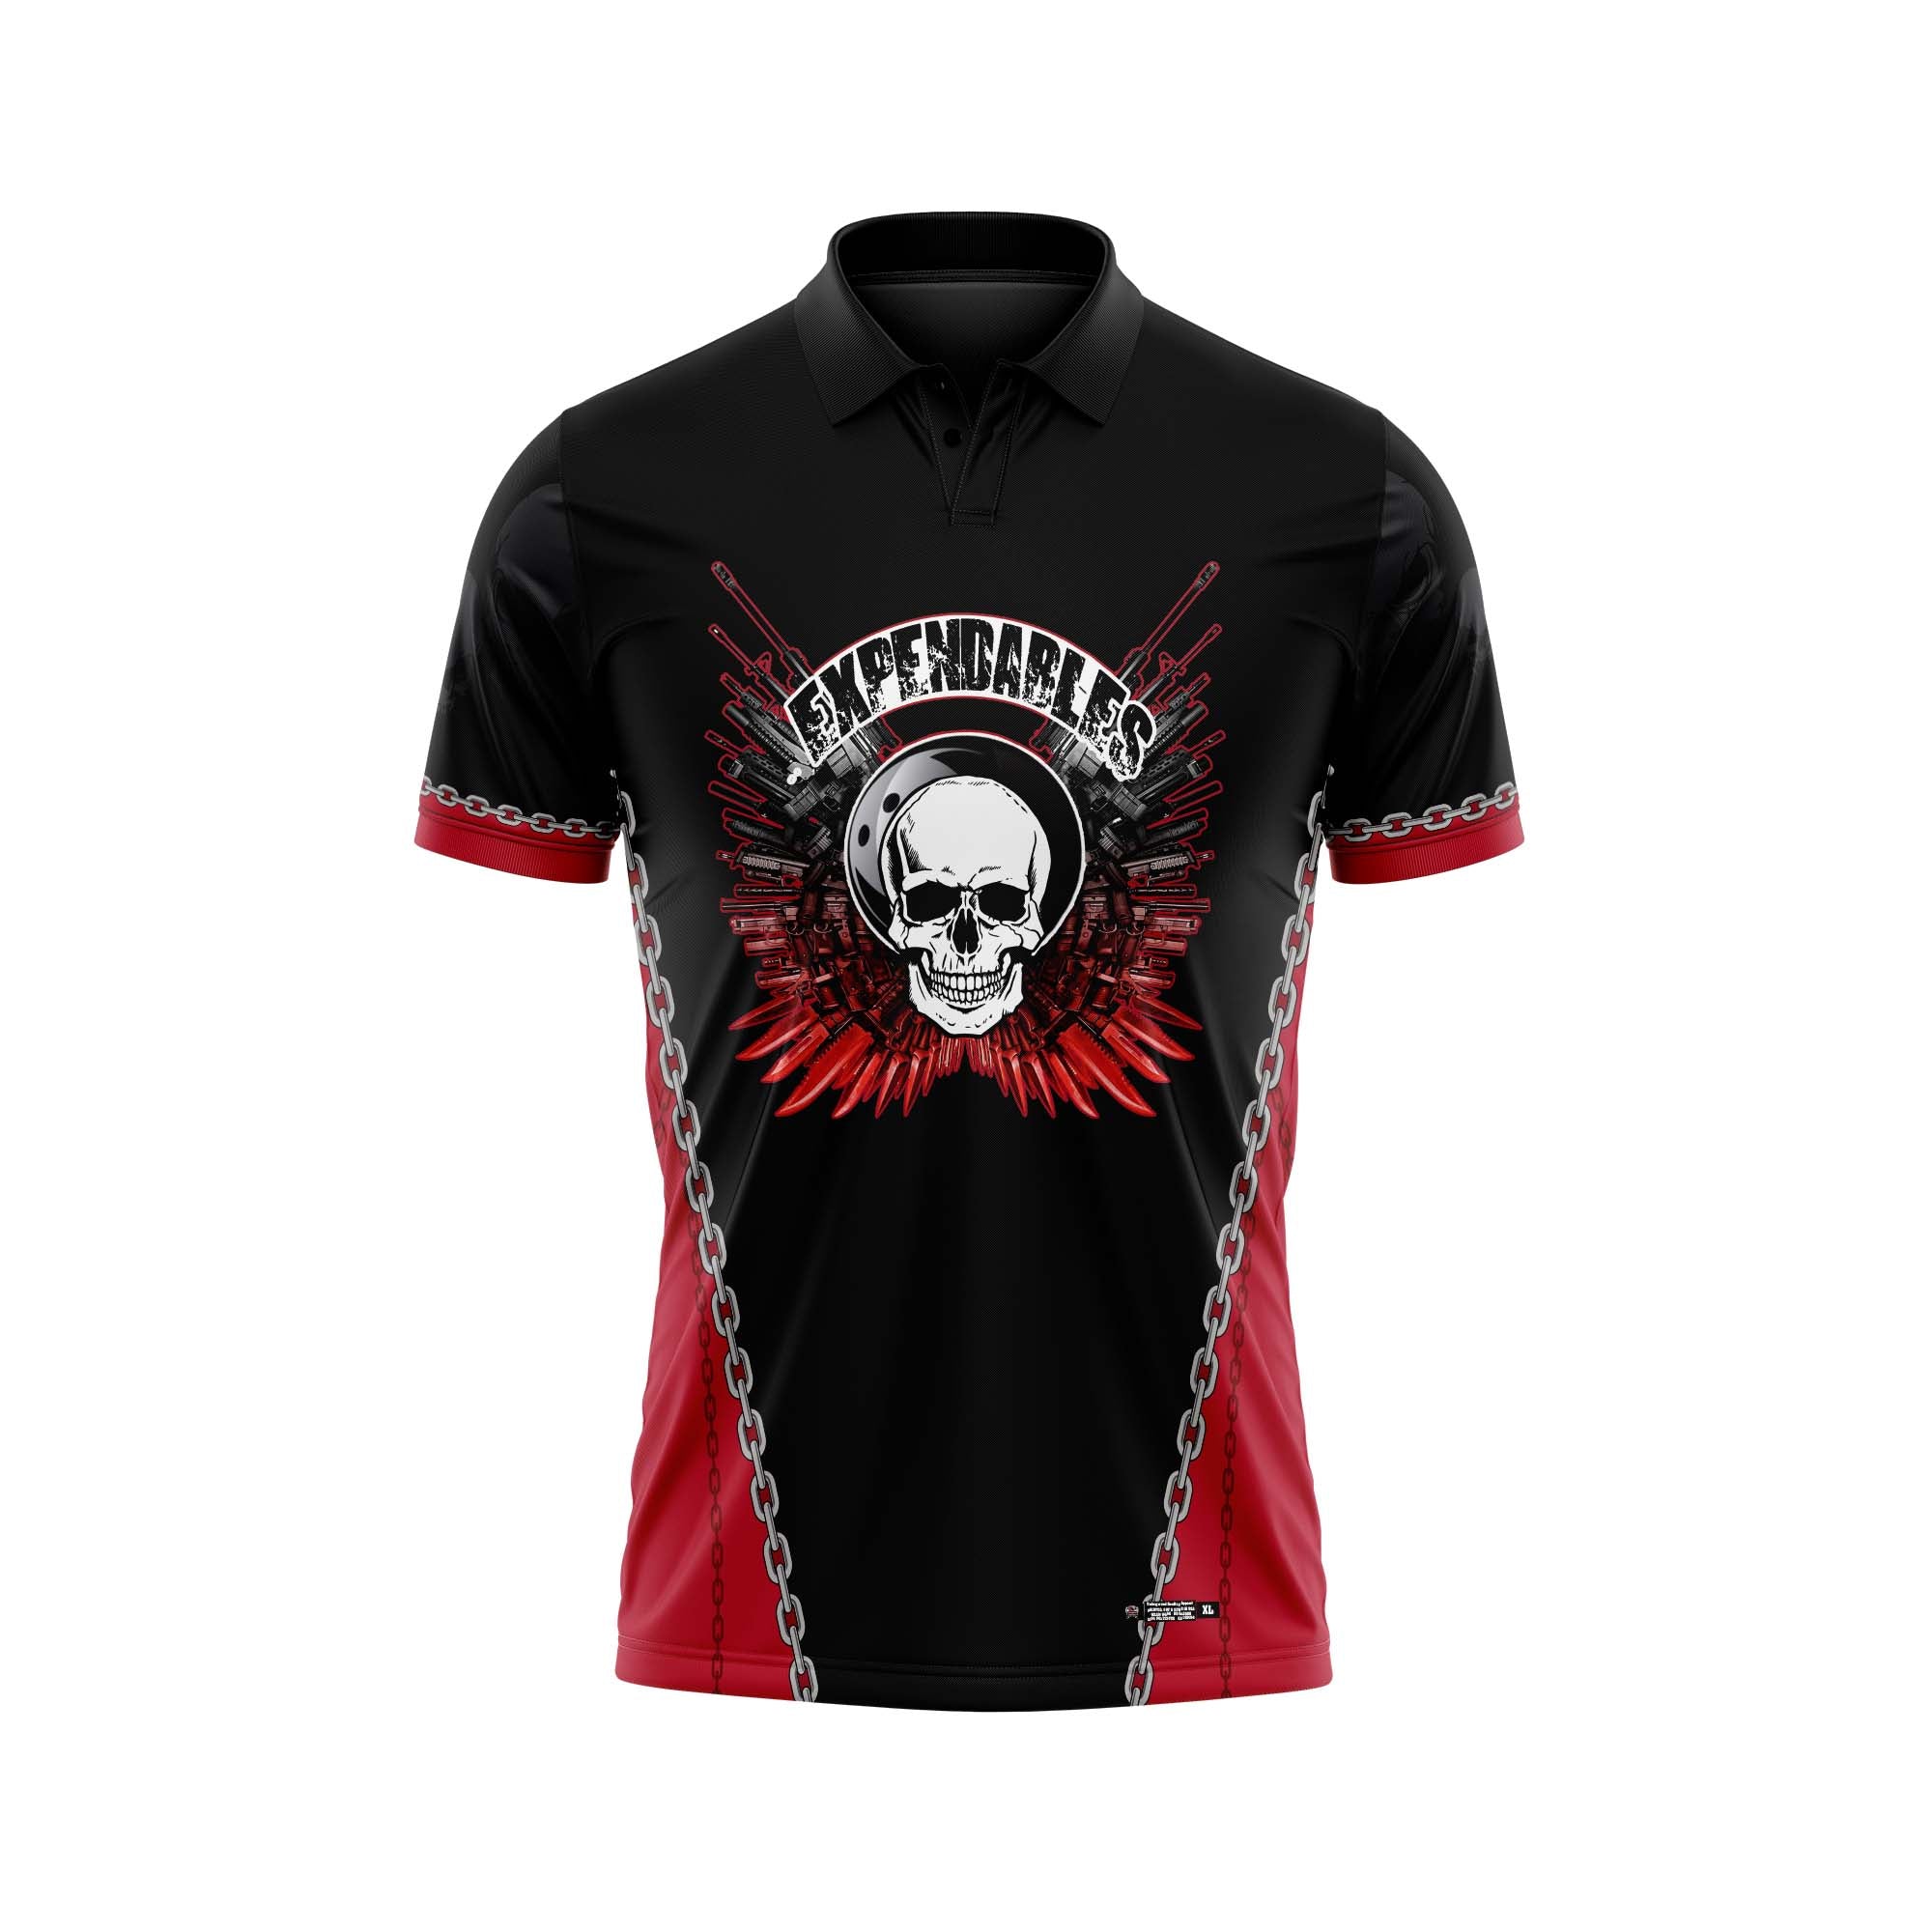 The Expendables Red & Black Jersey